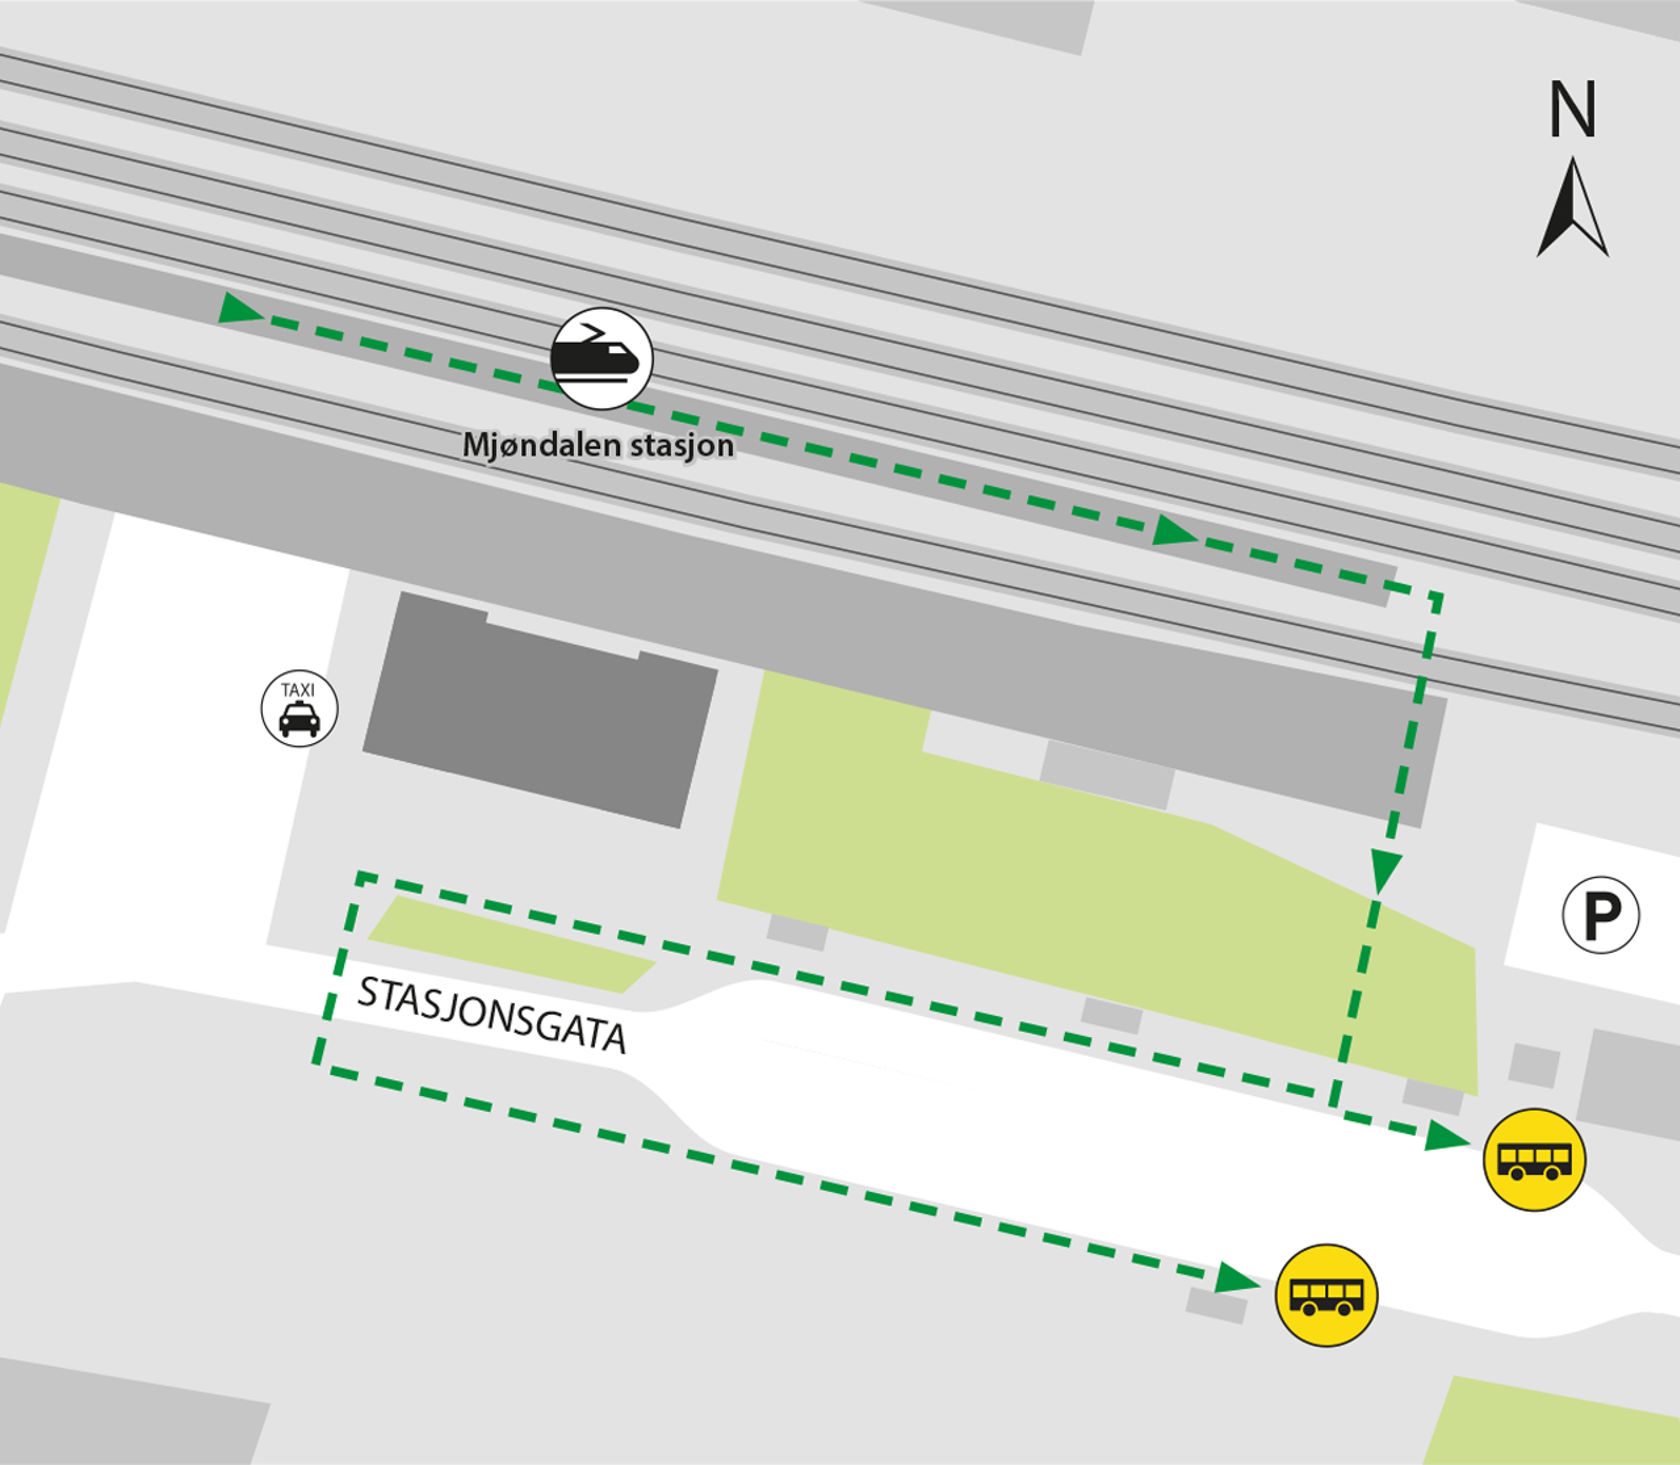 Map shows rail replacement service departs from Mjøndalen stasjon bus stops C and D